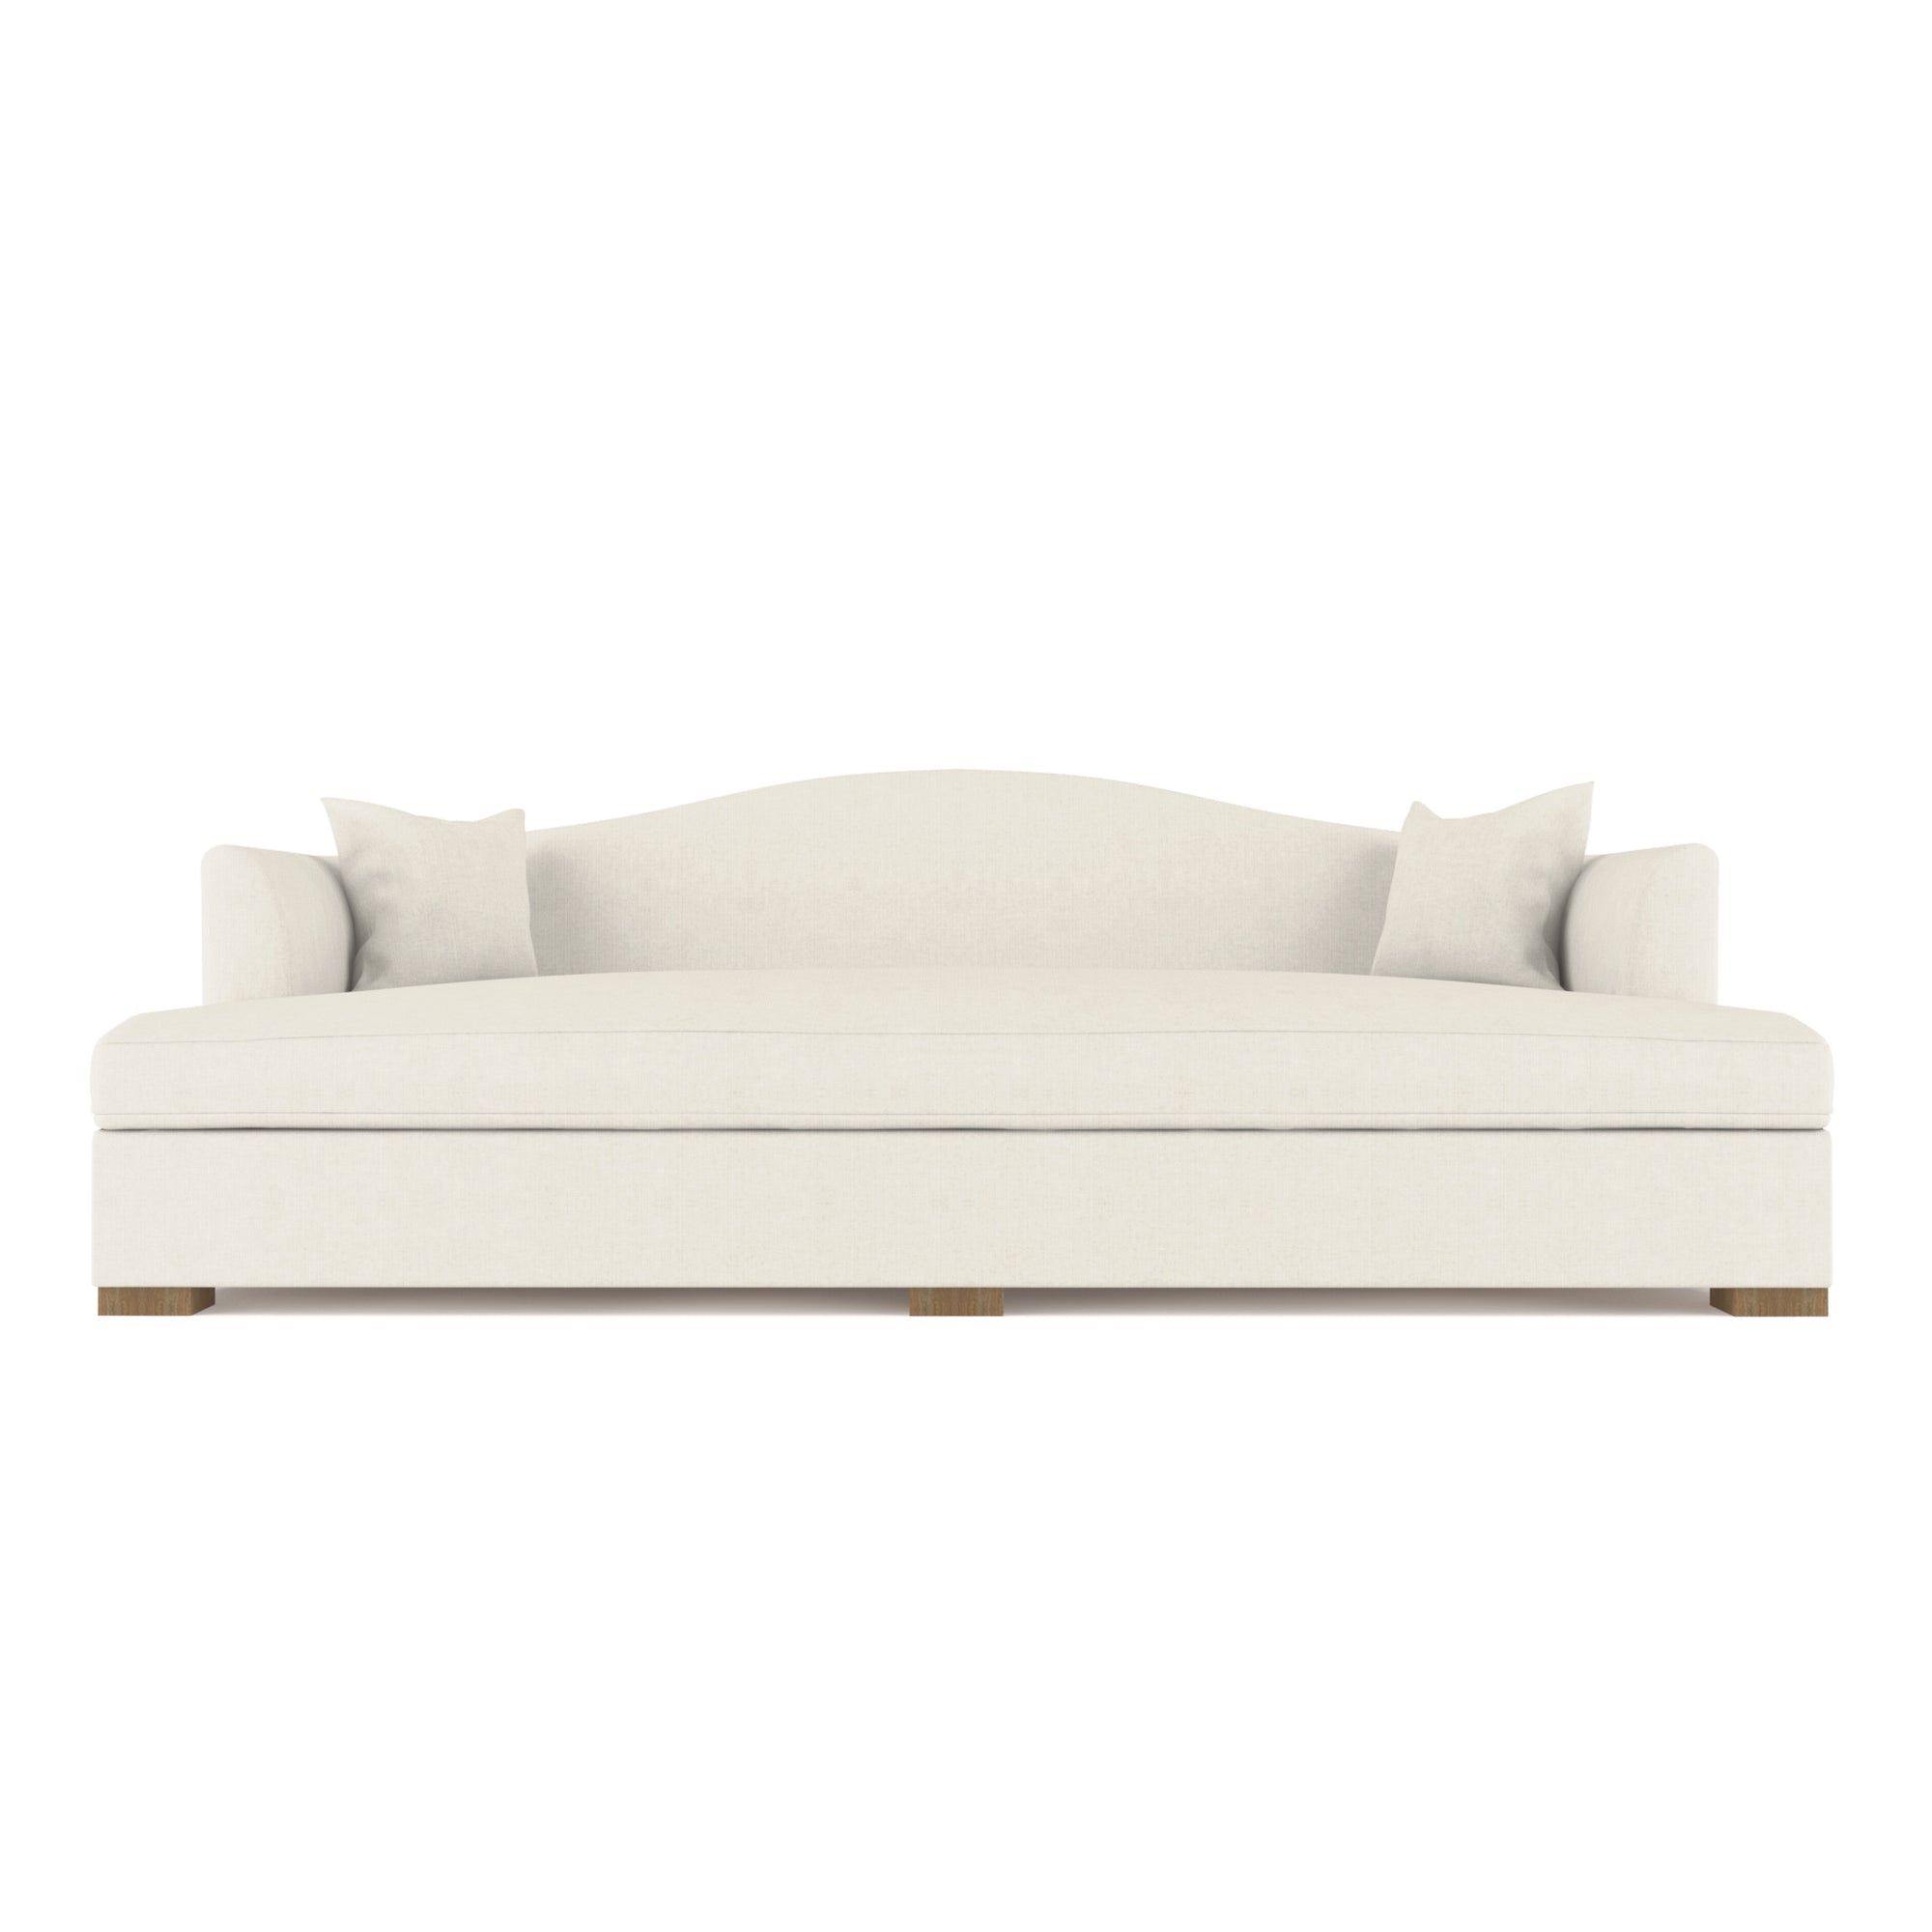 Horatio Daybed - Alabaster Box Weave Linen